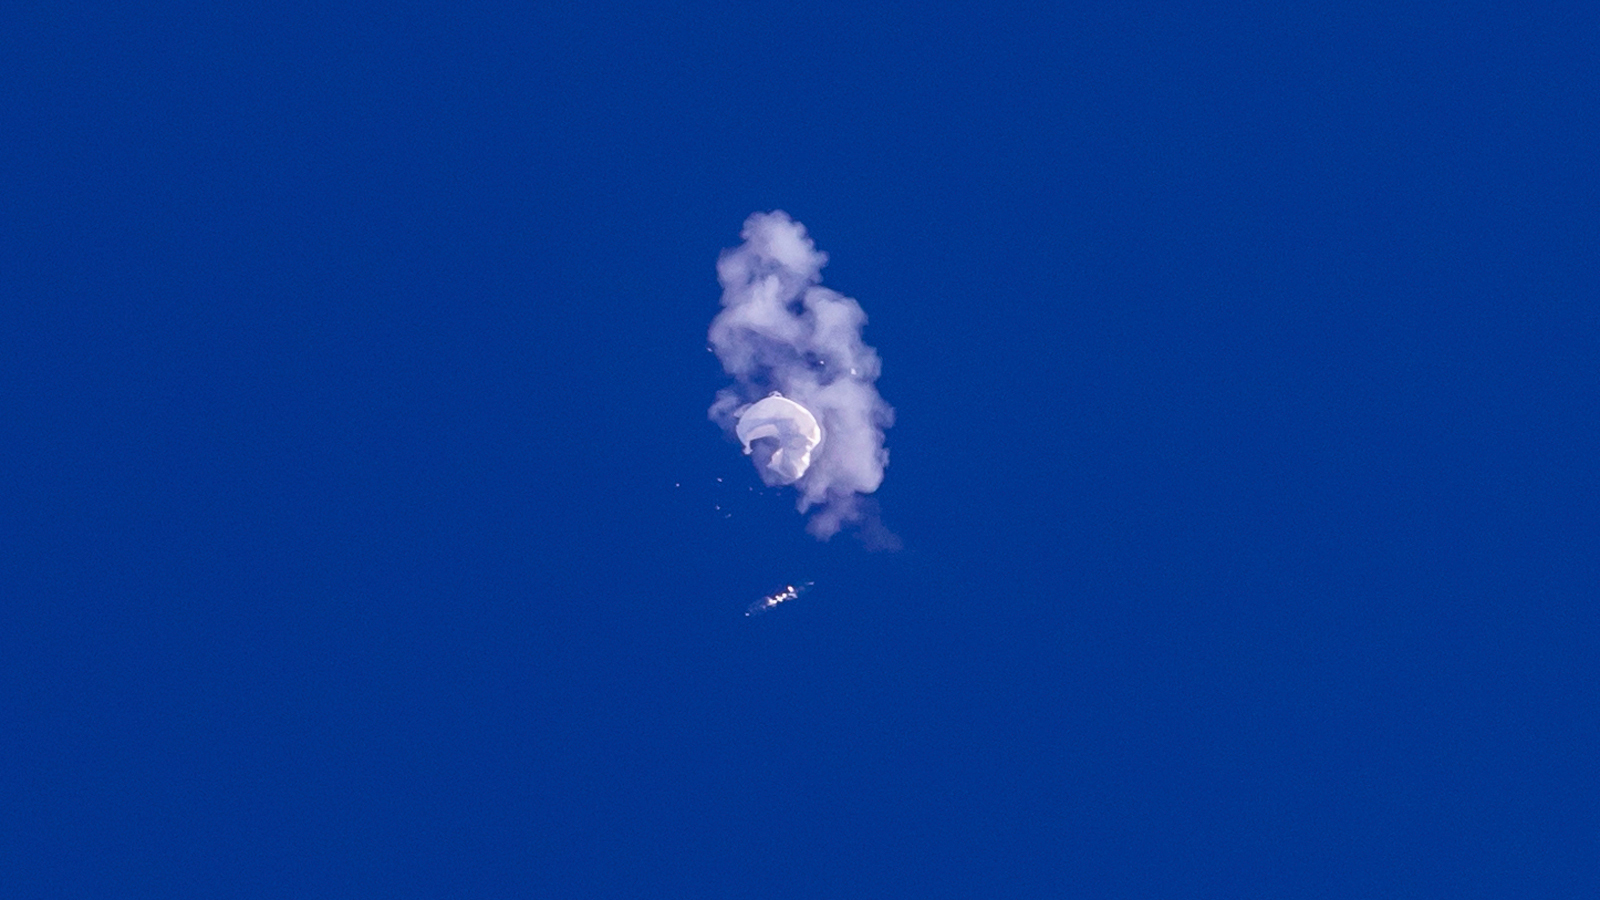 US military fighter jets shoot down the Chinese high-altitude balloon over the Atlantic Ocean on Saturday.